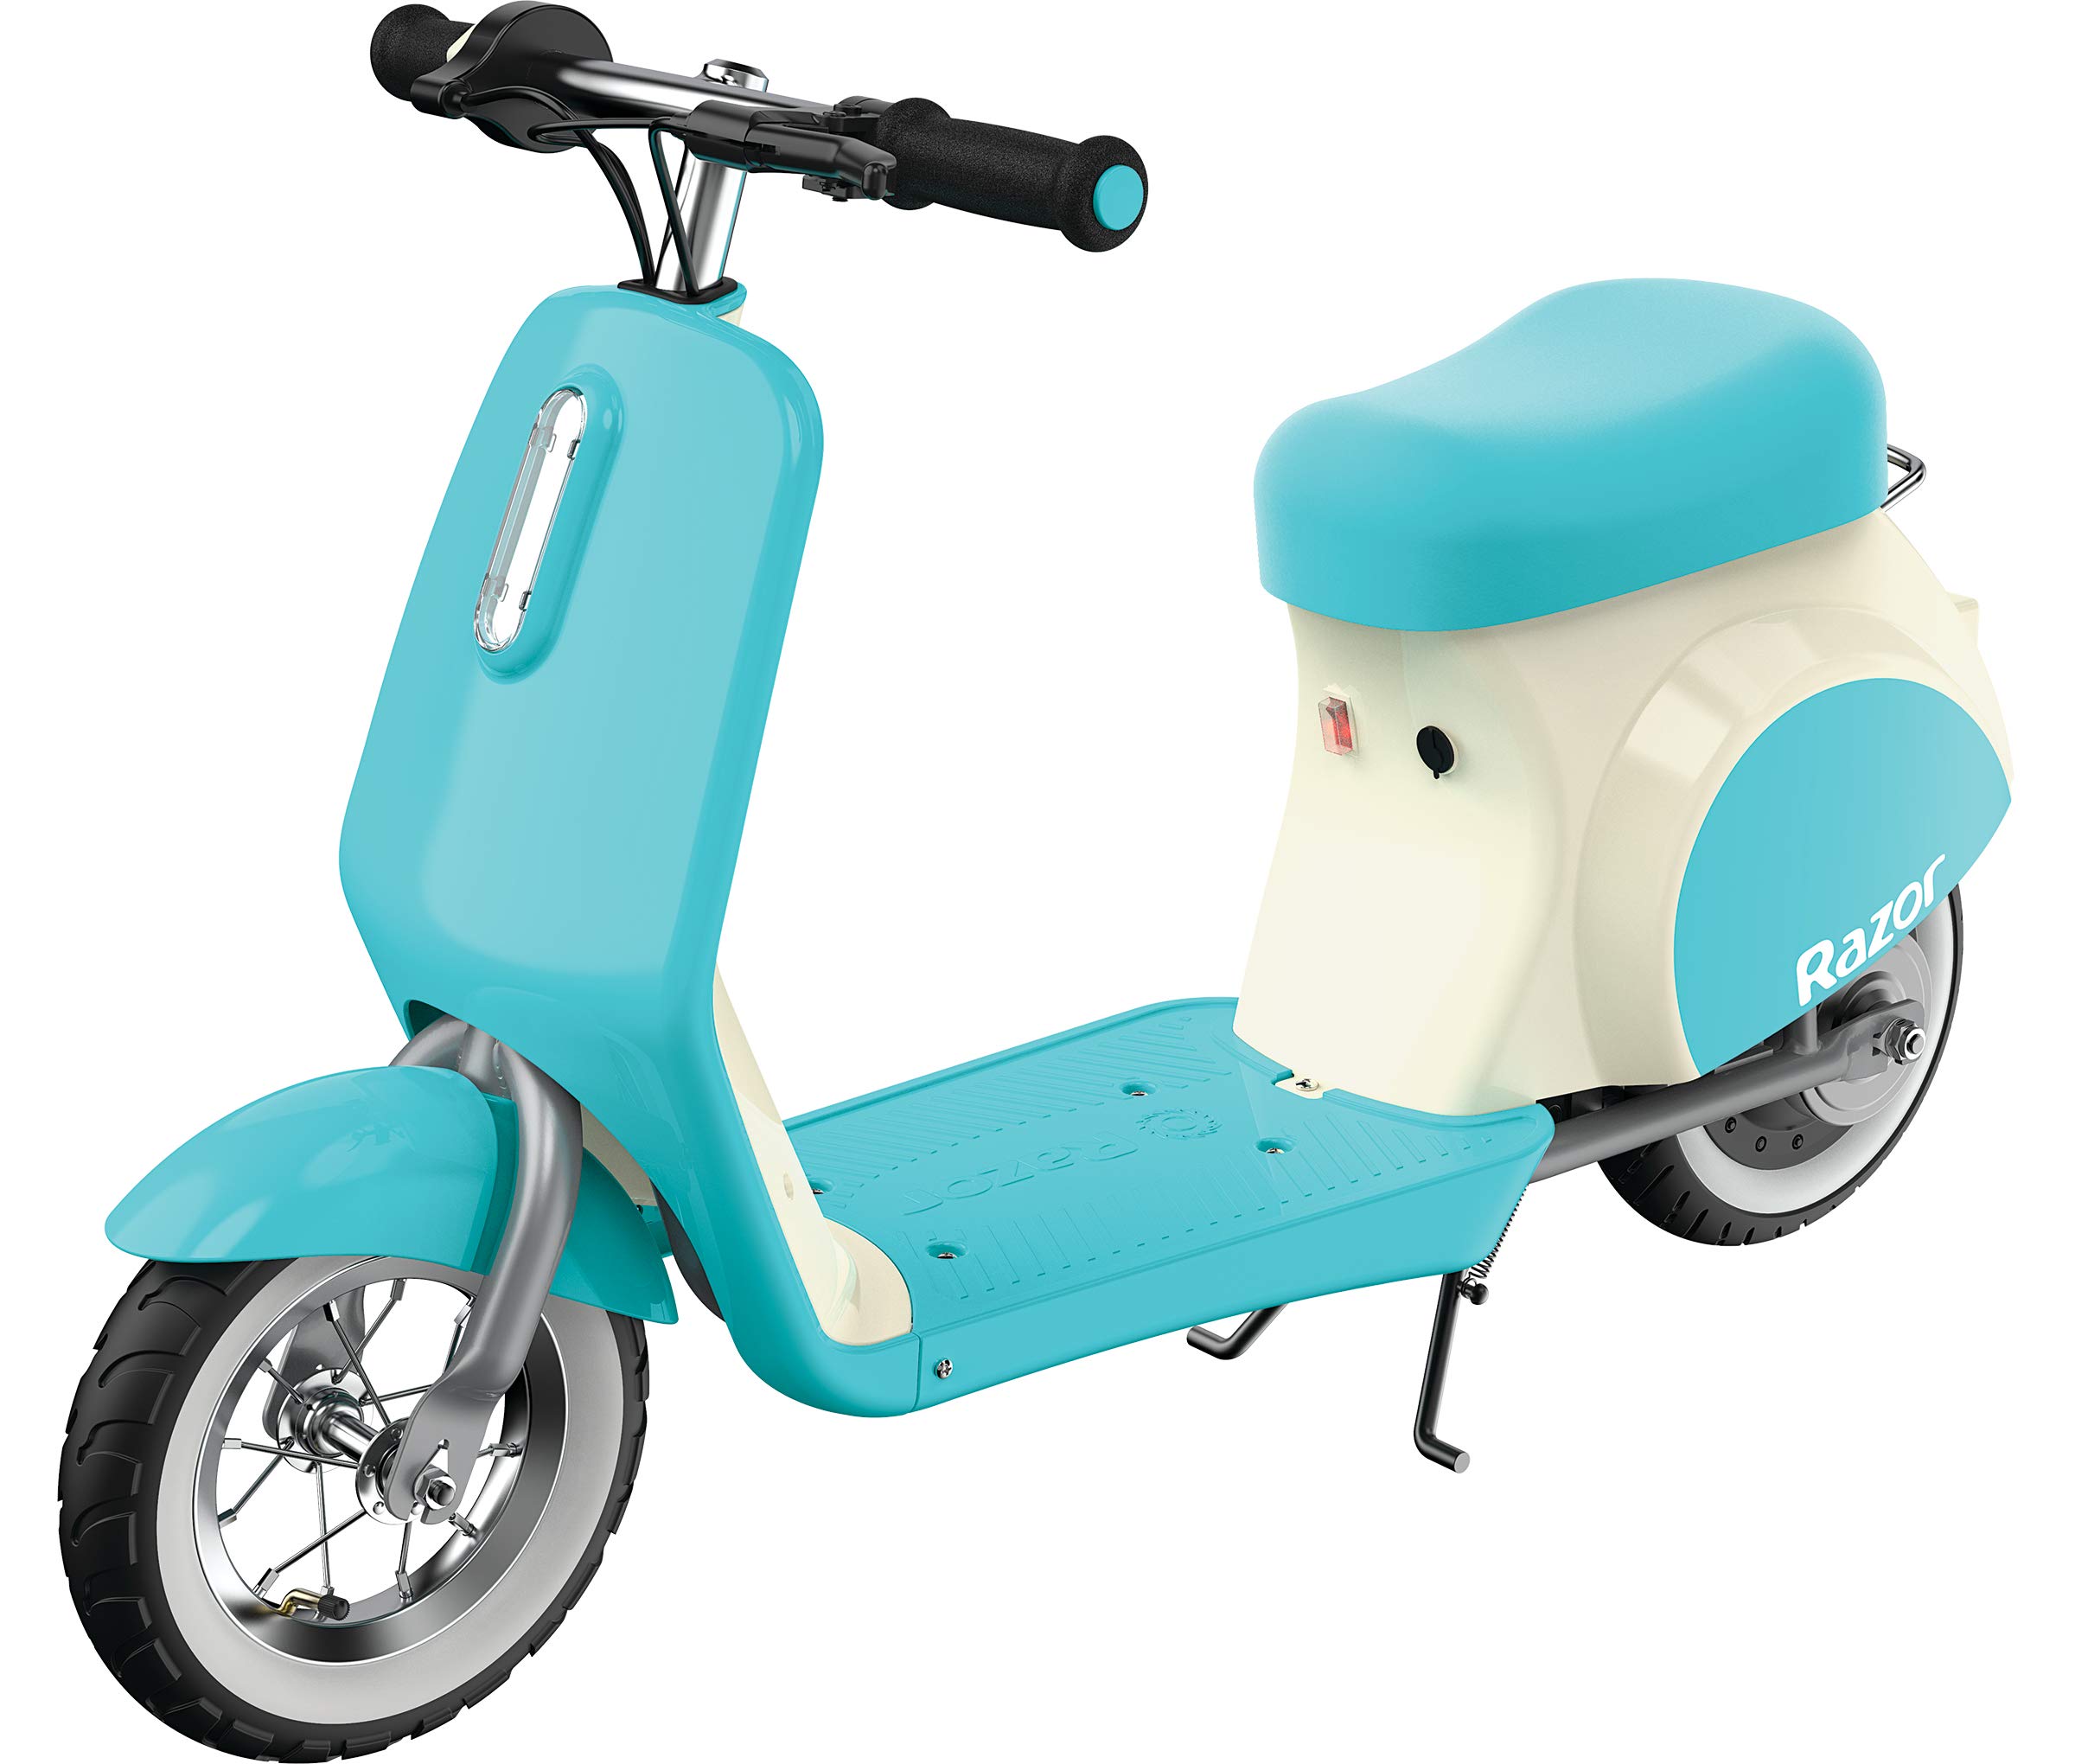 Razor Pocket Mod Petite Miniature Euro-Style Electric Scooter for Ages 7+, Vintage-Inspired Design, Hub-Driven Motor, Pneumatic White Wall Tires, Up to 40 Minutes Ride Time